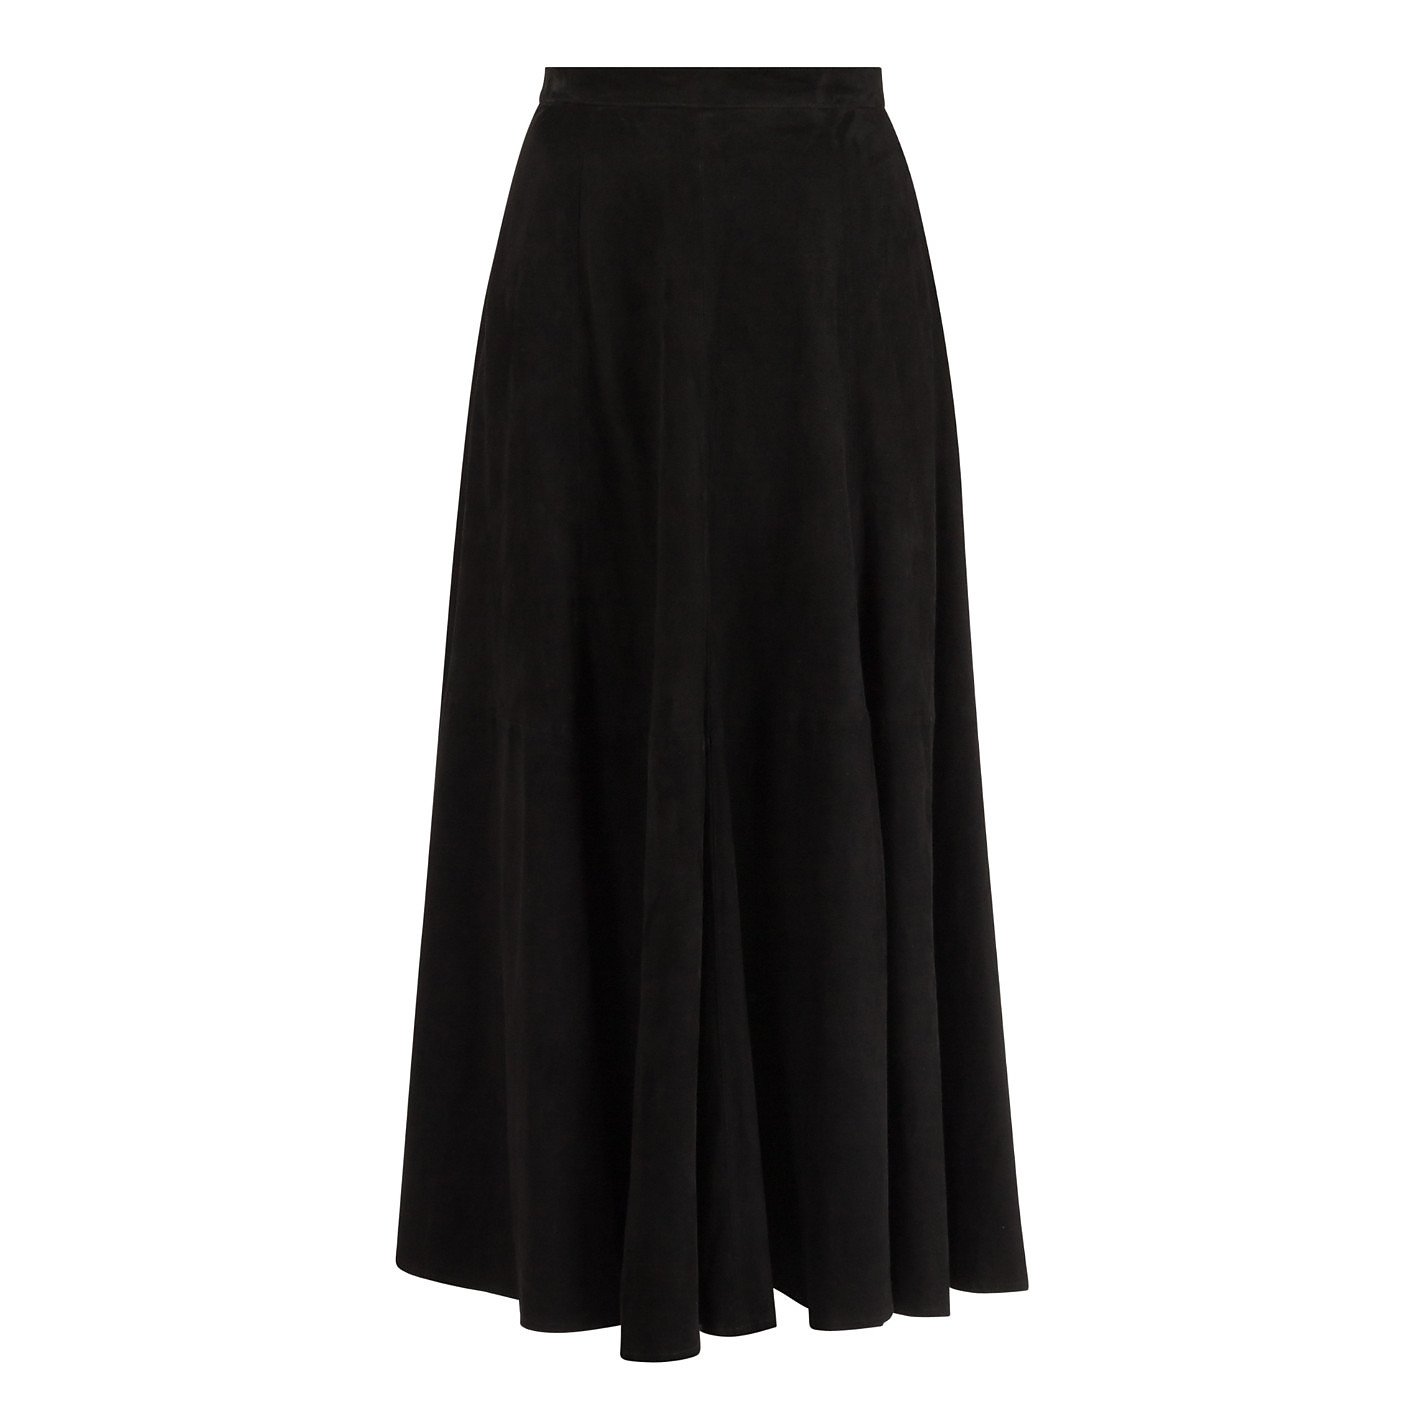 Anna Lascata Flared Suede Skirt